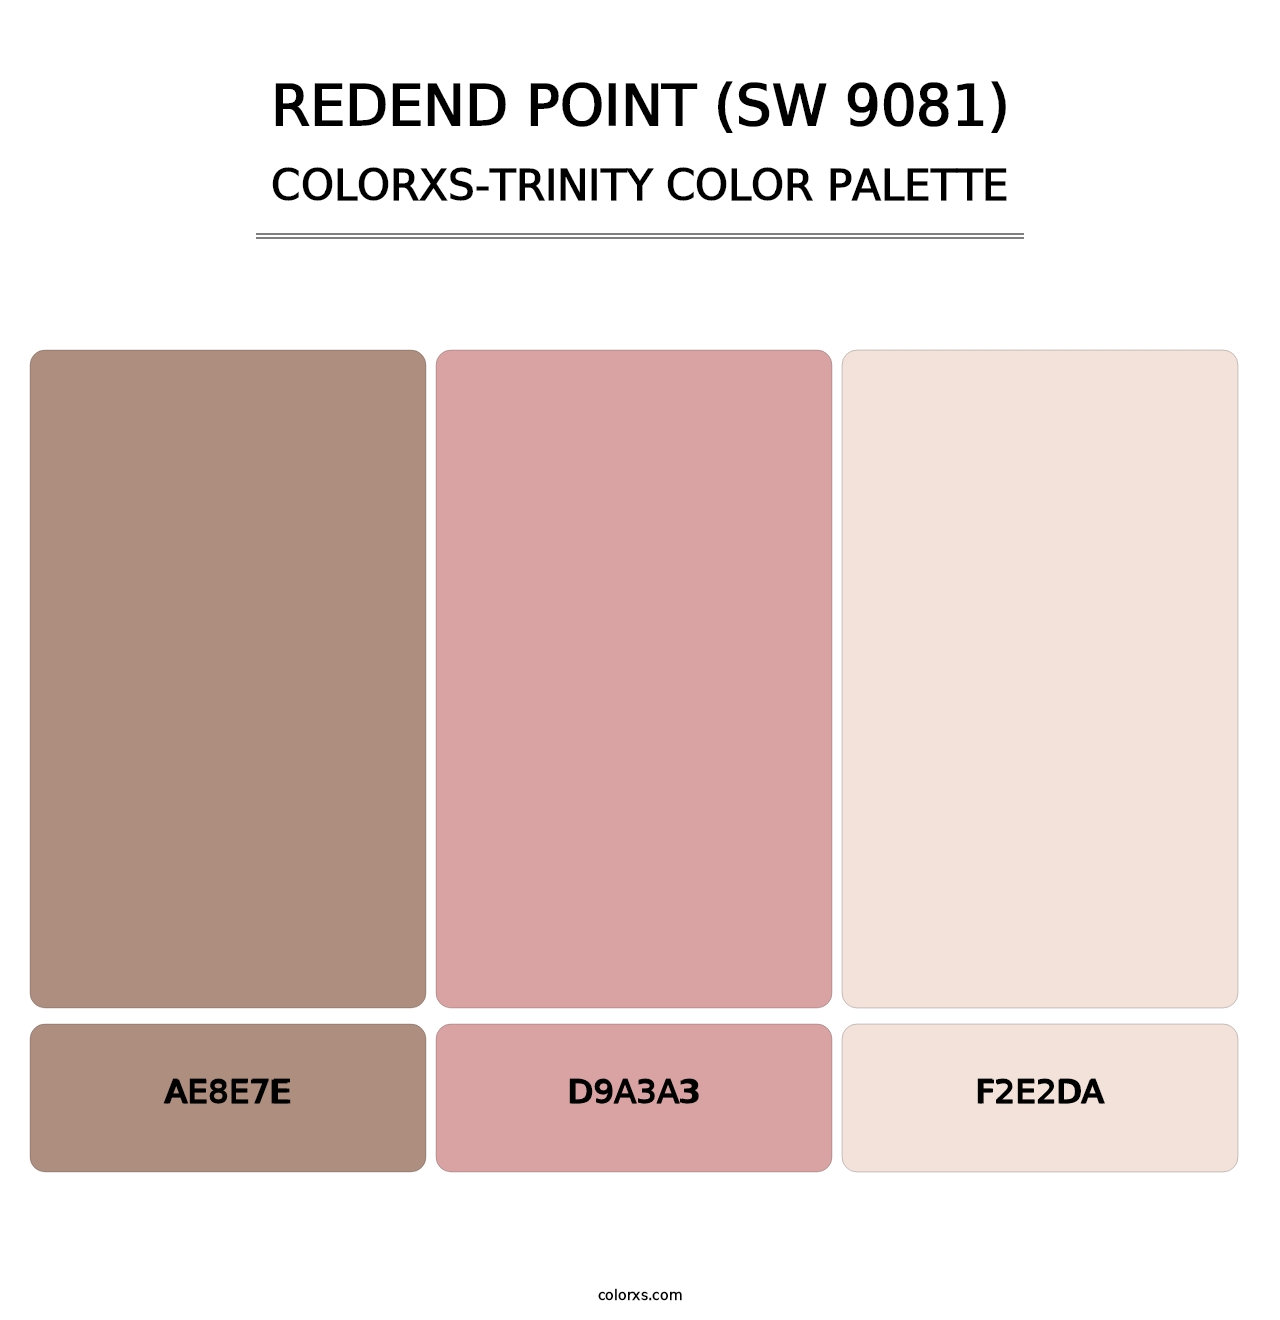 Redend Point (SW 9081) - Colorxs Trinity Palette